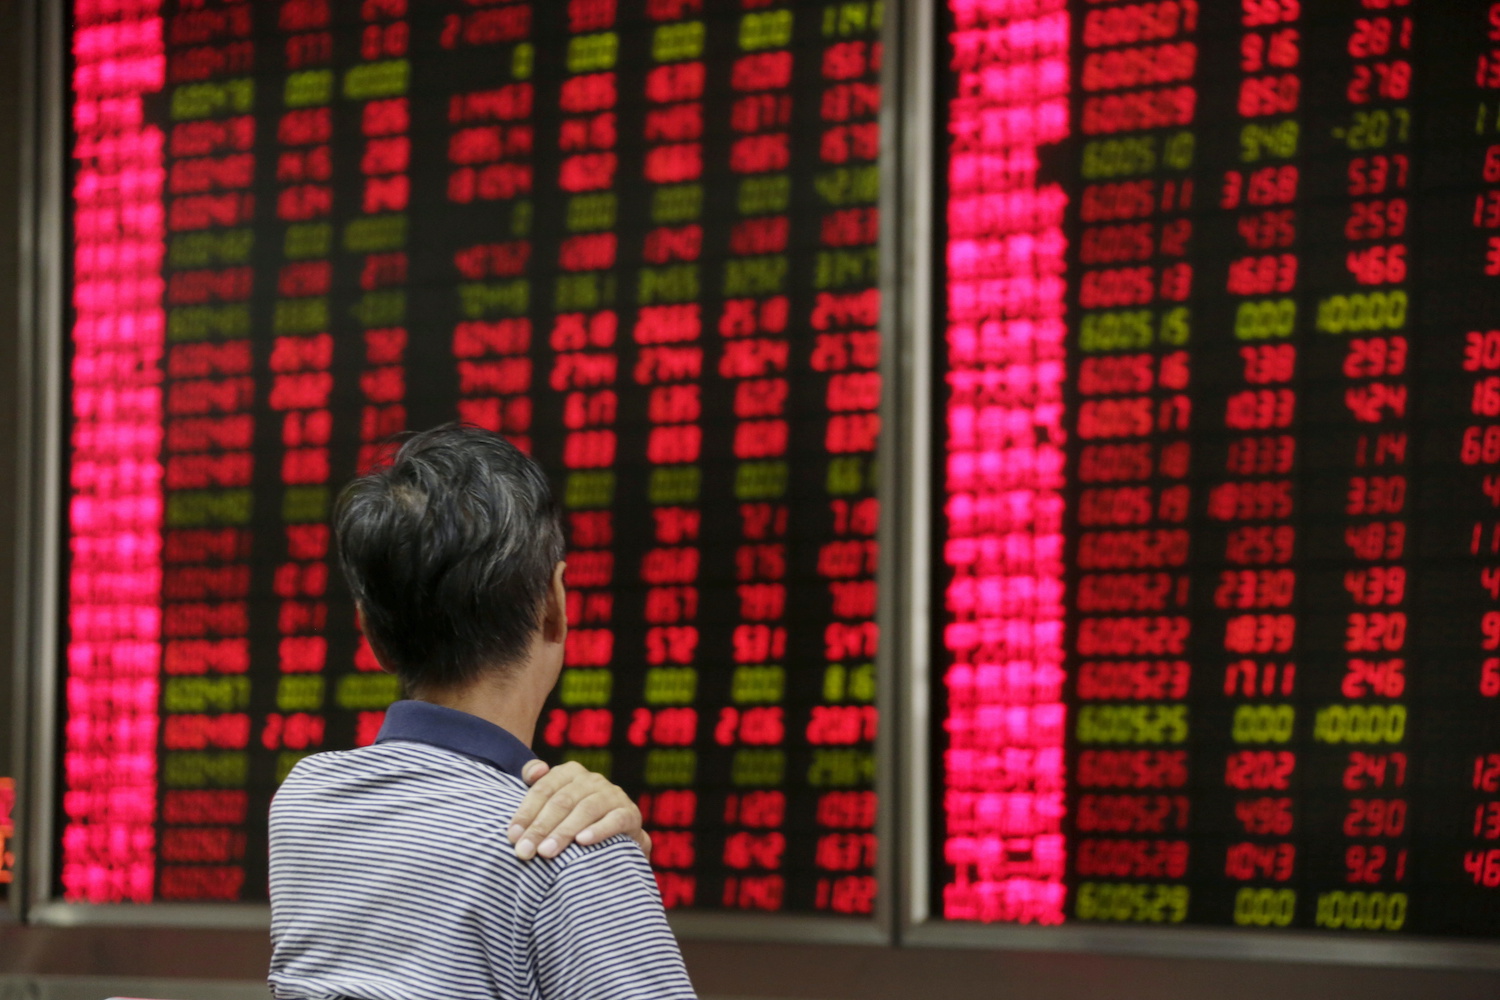 An investor looks at an electronic board at a brokerage house in Beijing